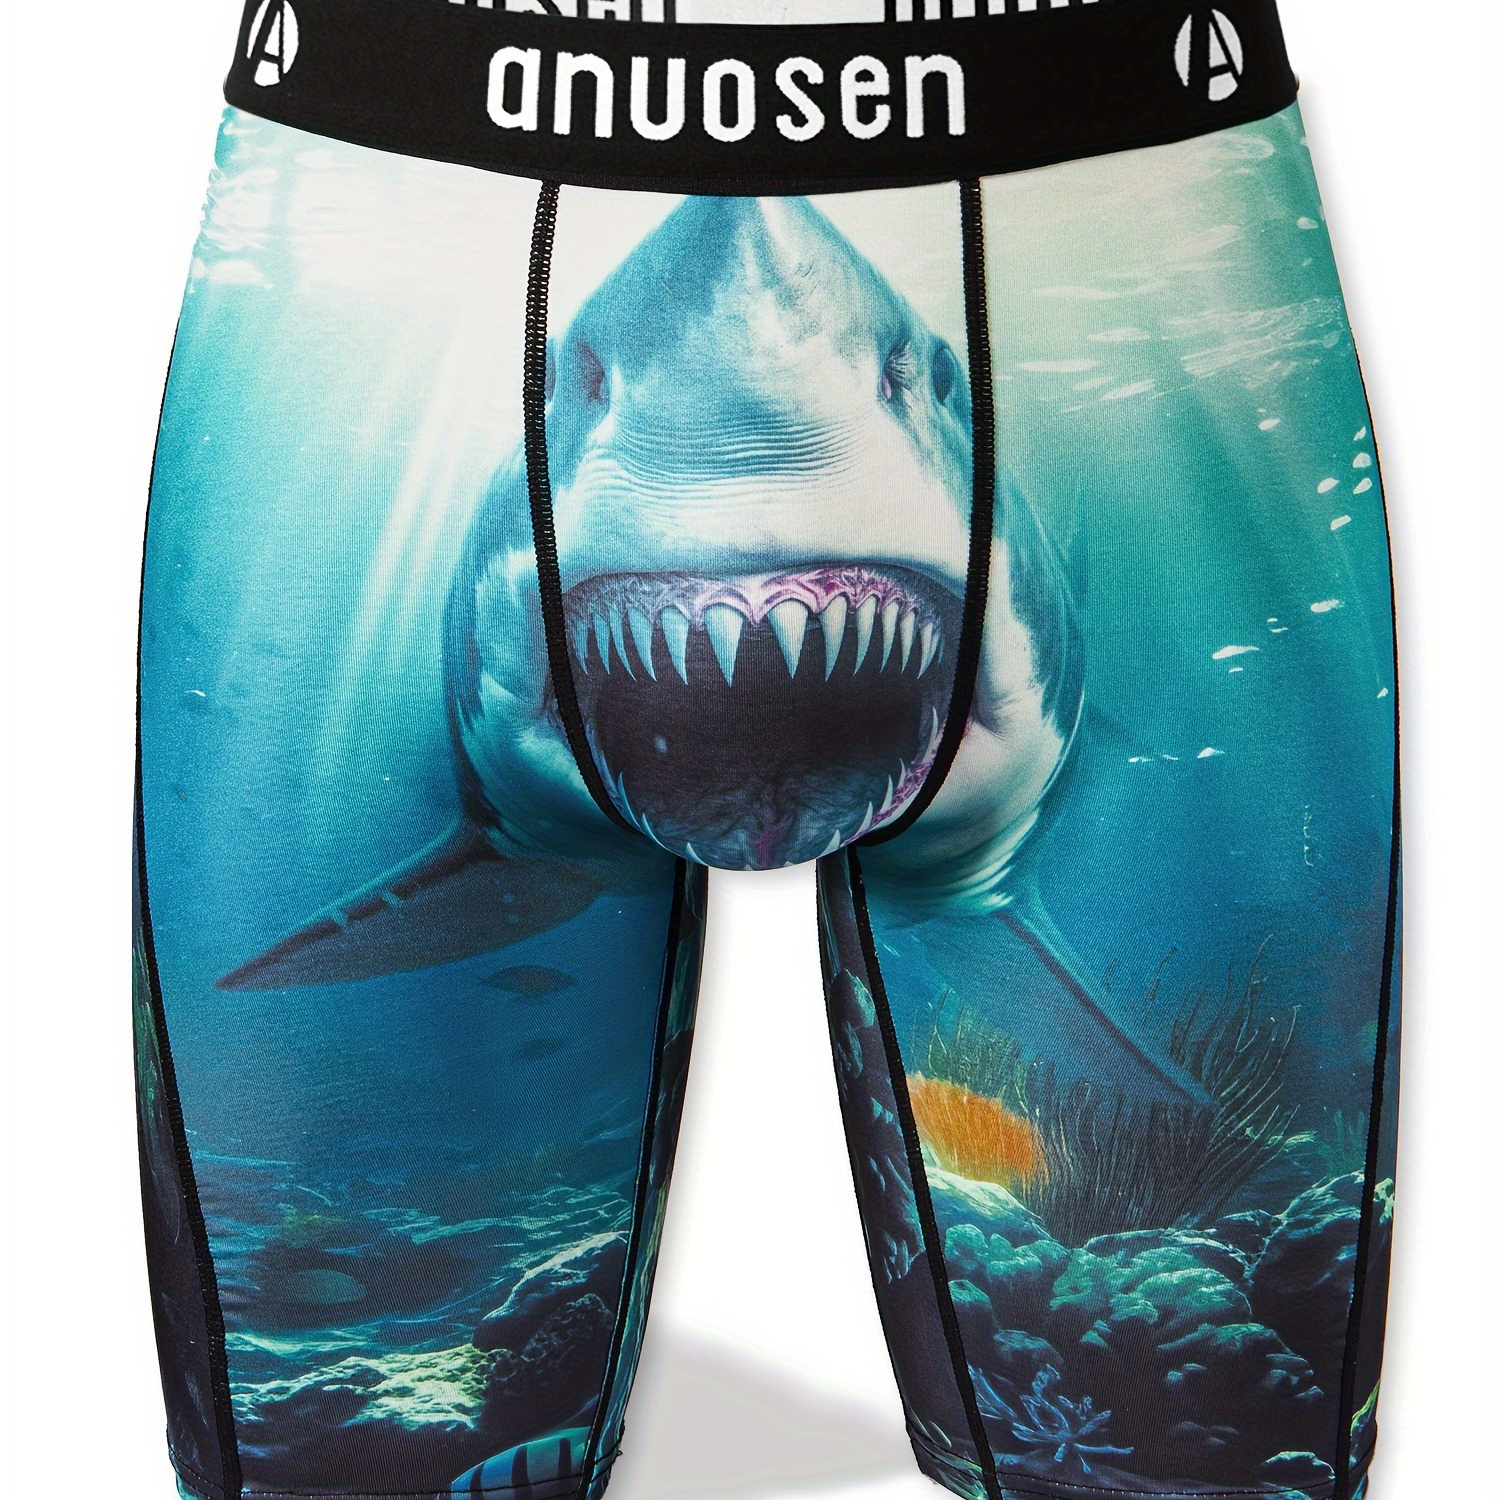 

Men's Sports Long Boxer Briefs Shorts, Shark Print Anti-wear Legs, Quick Dry Breathable Comfy Stretchy Boxer Trunks, Swim Trunks For Beach Pool, Running Pants For Outdoor